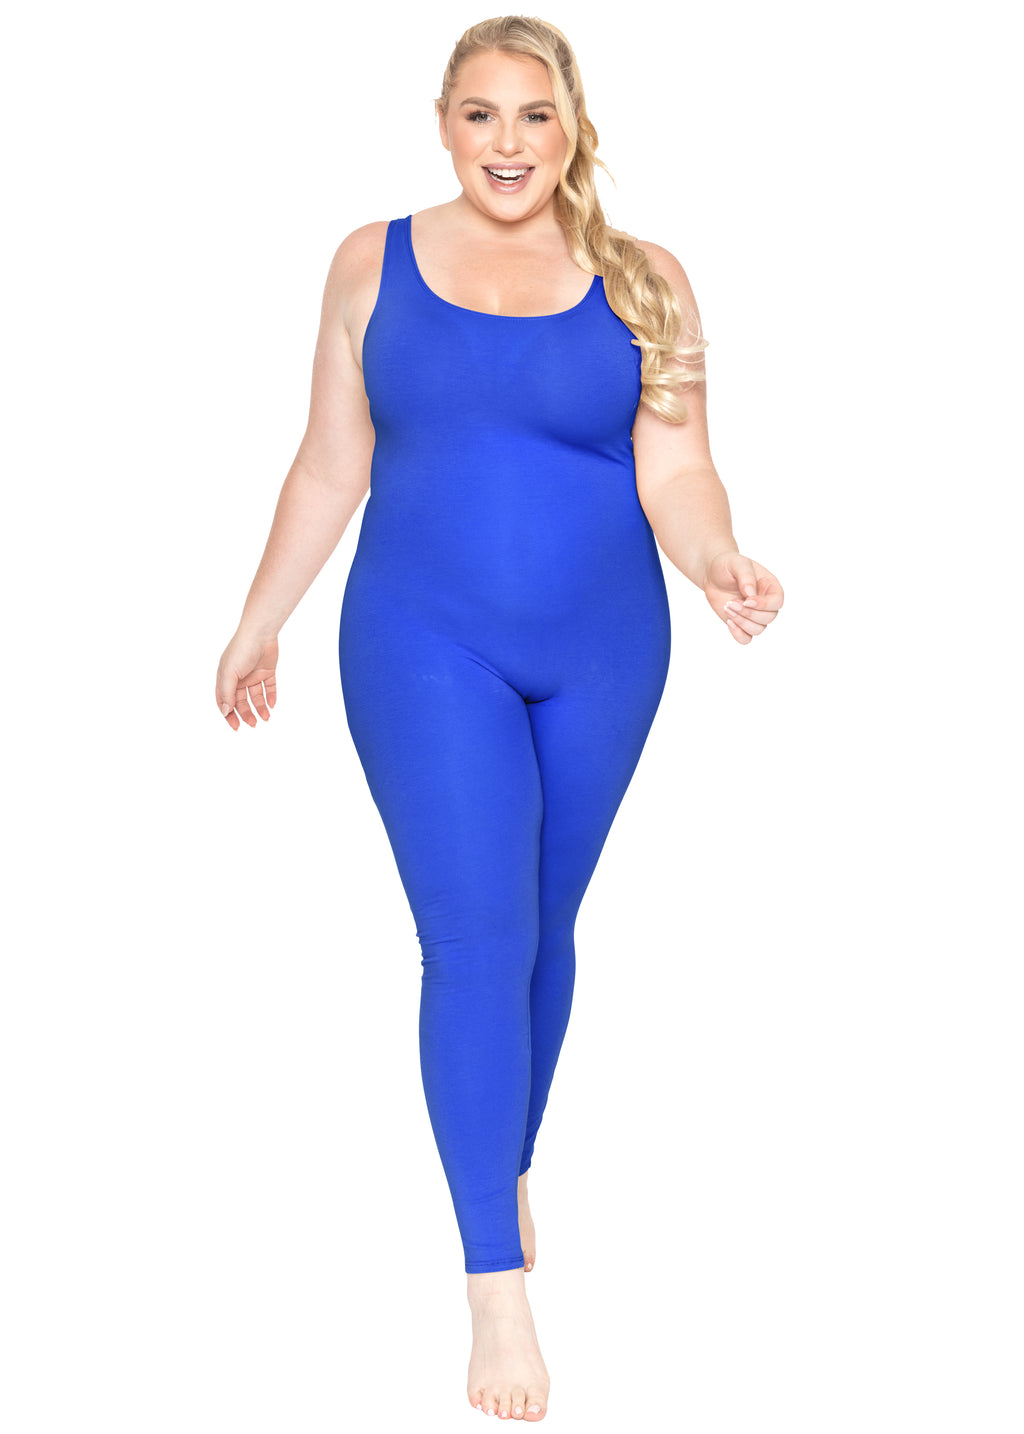 Plus Size Stretchable Track Pant For Women – Cotton Lycra at Rs 795.00, Ladies Lower